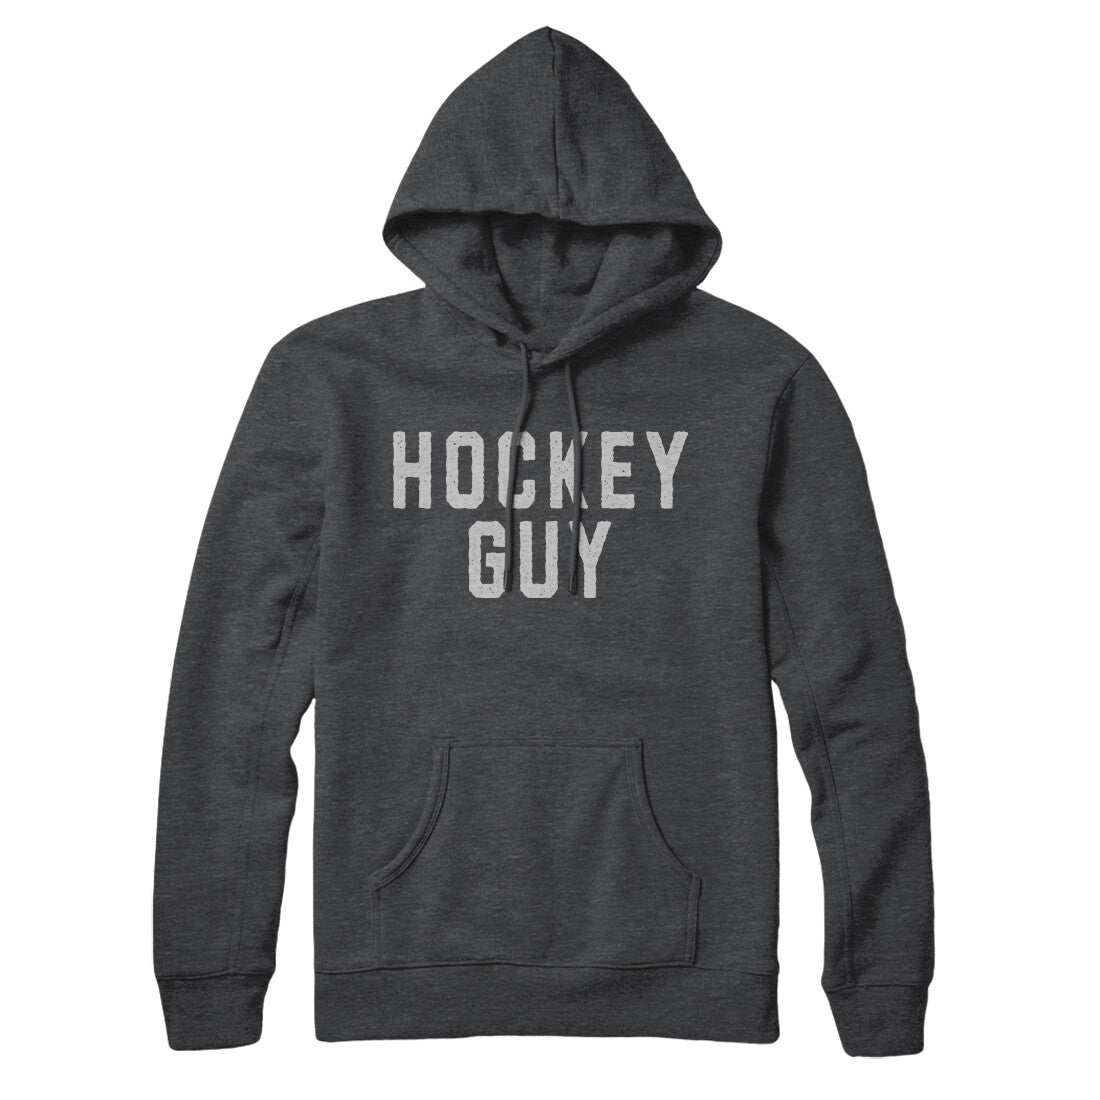 Hockey Guy in Charcoal Heather Color